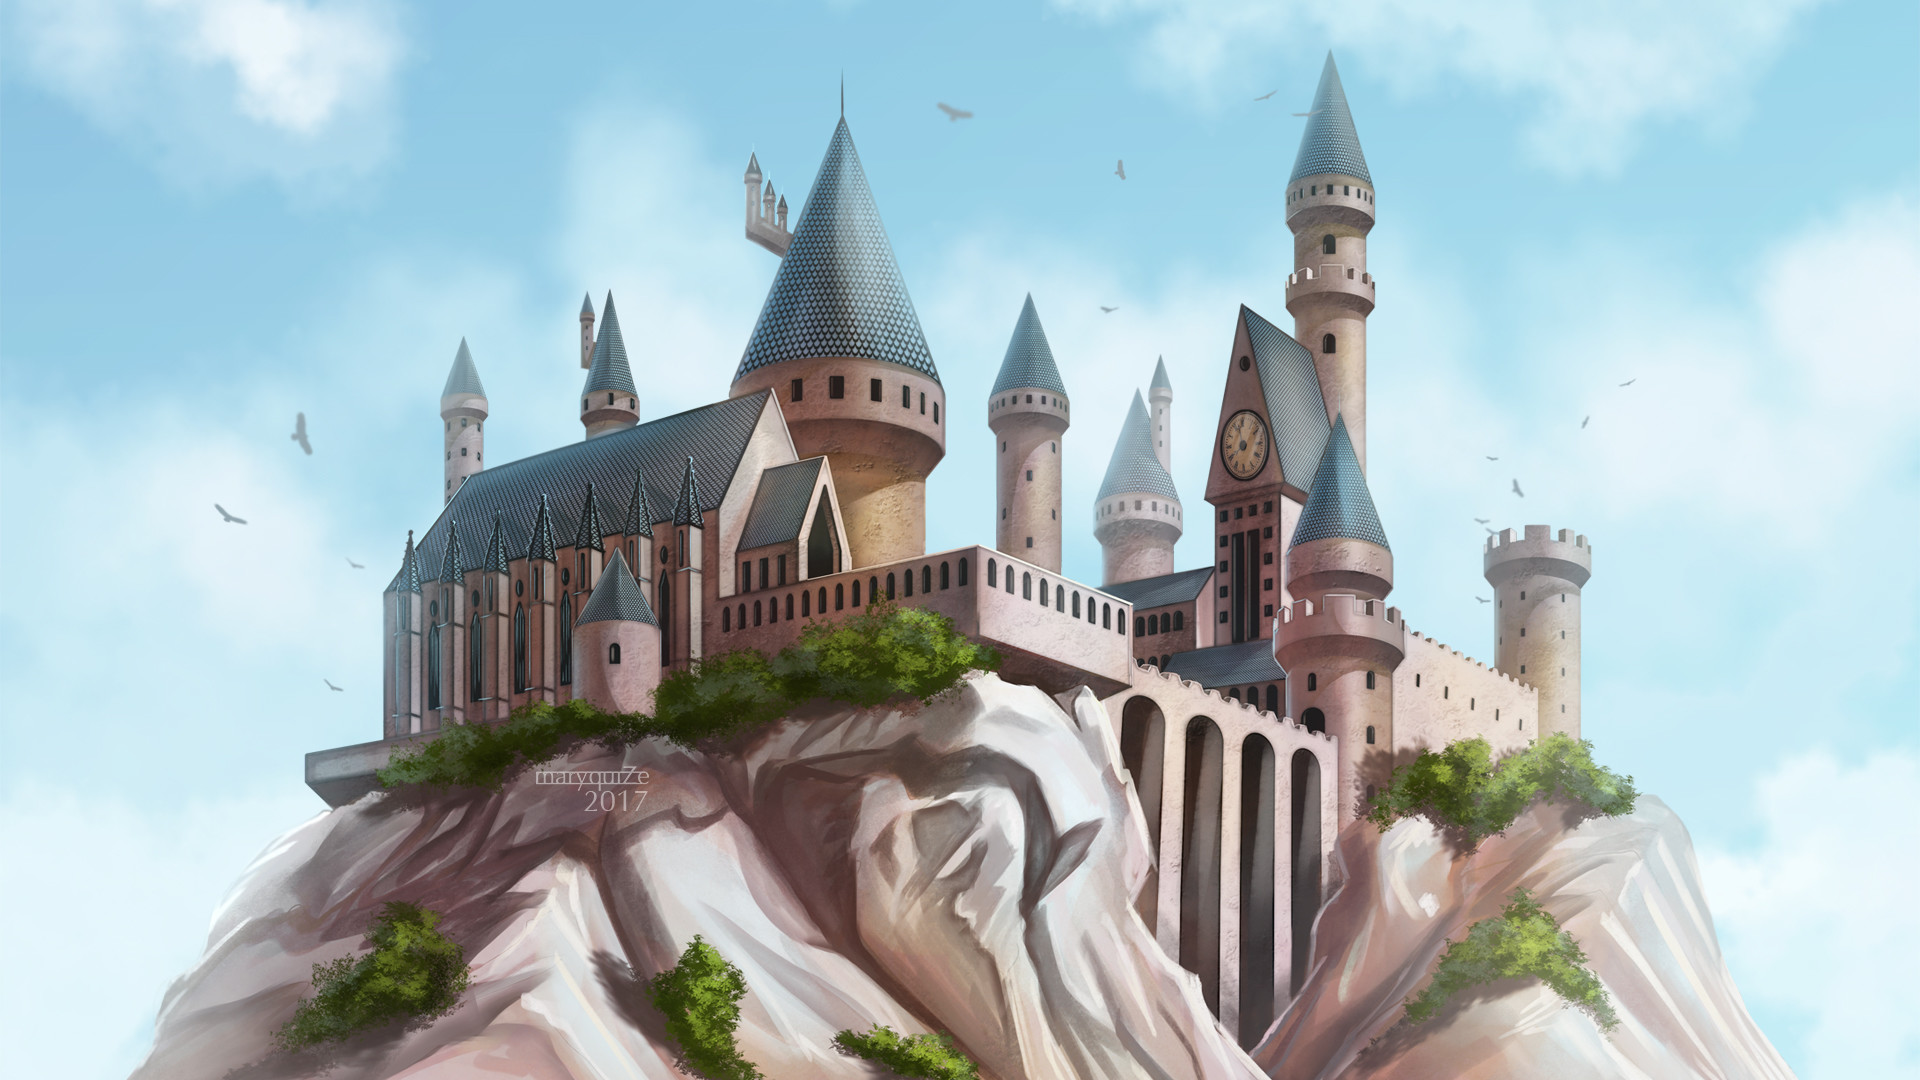 1920x1080 Hogwarts wallpaper by maryquiZe Hogwarts wallpaper by maryquiZe